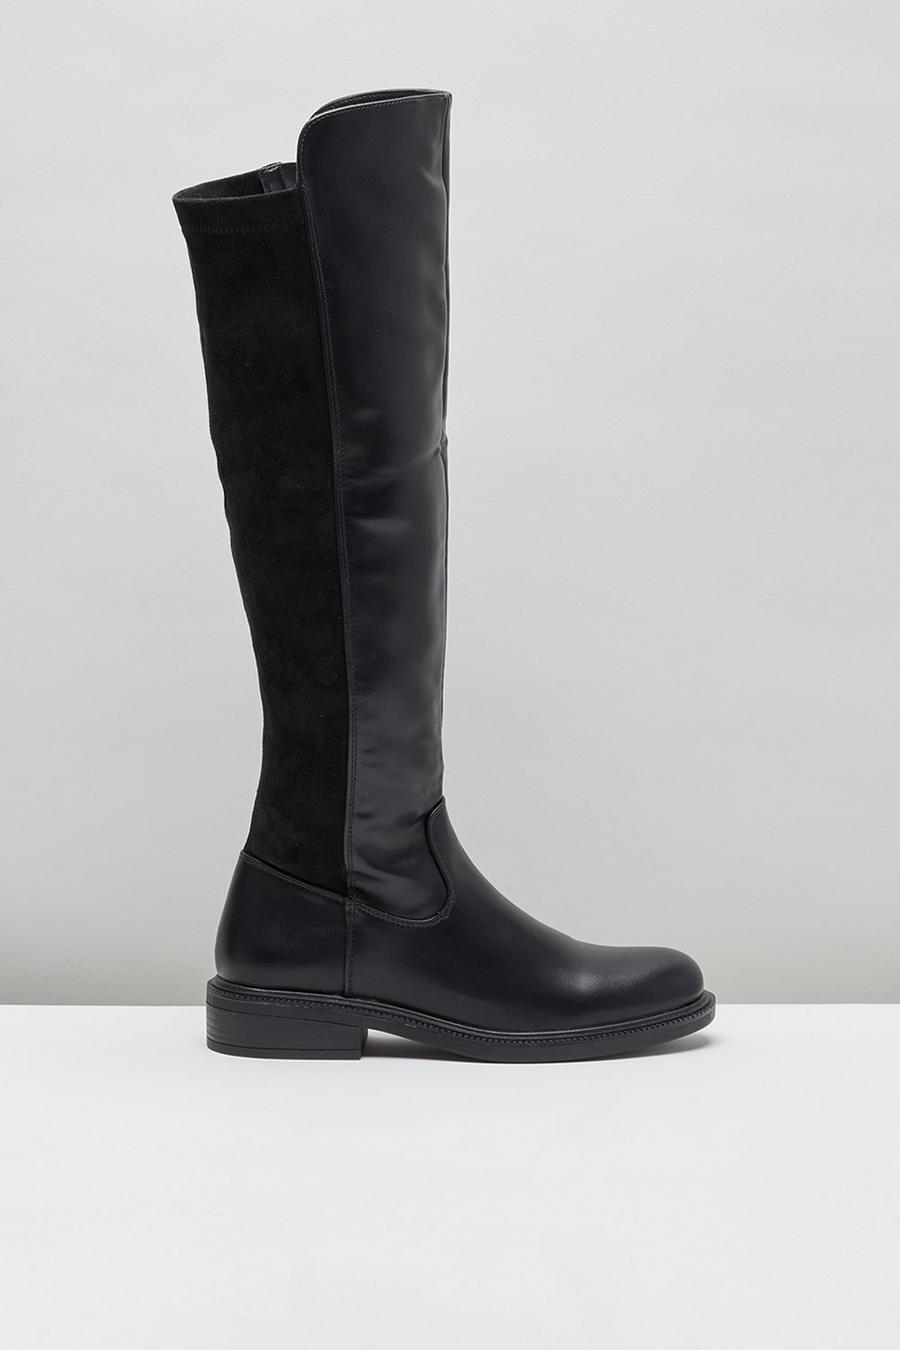 Kaia Over The Knee Riding Boot